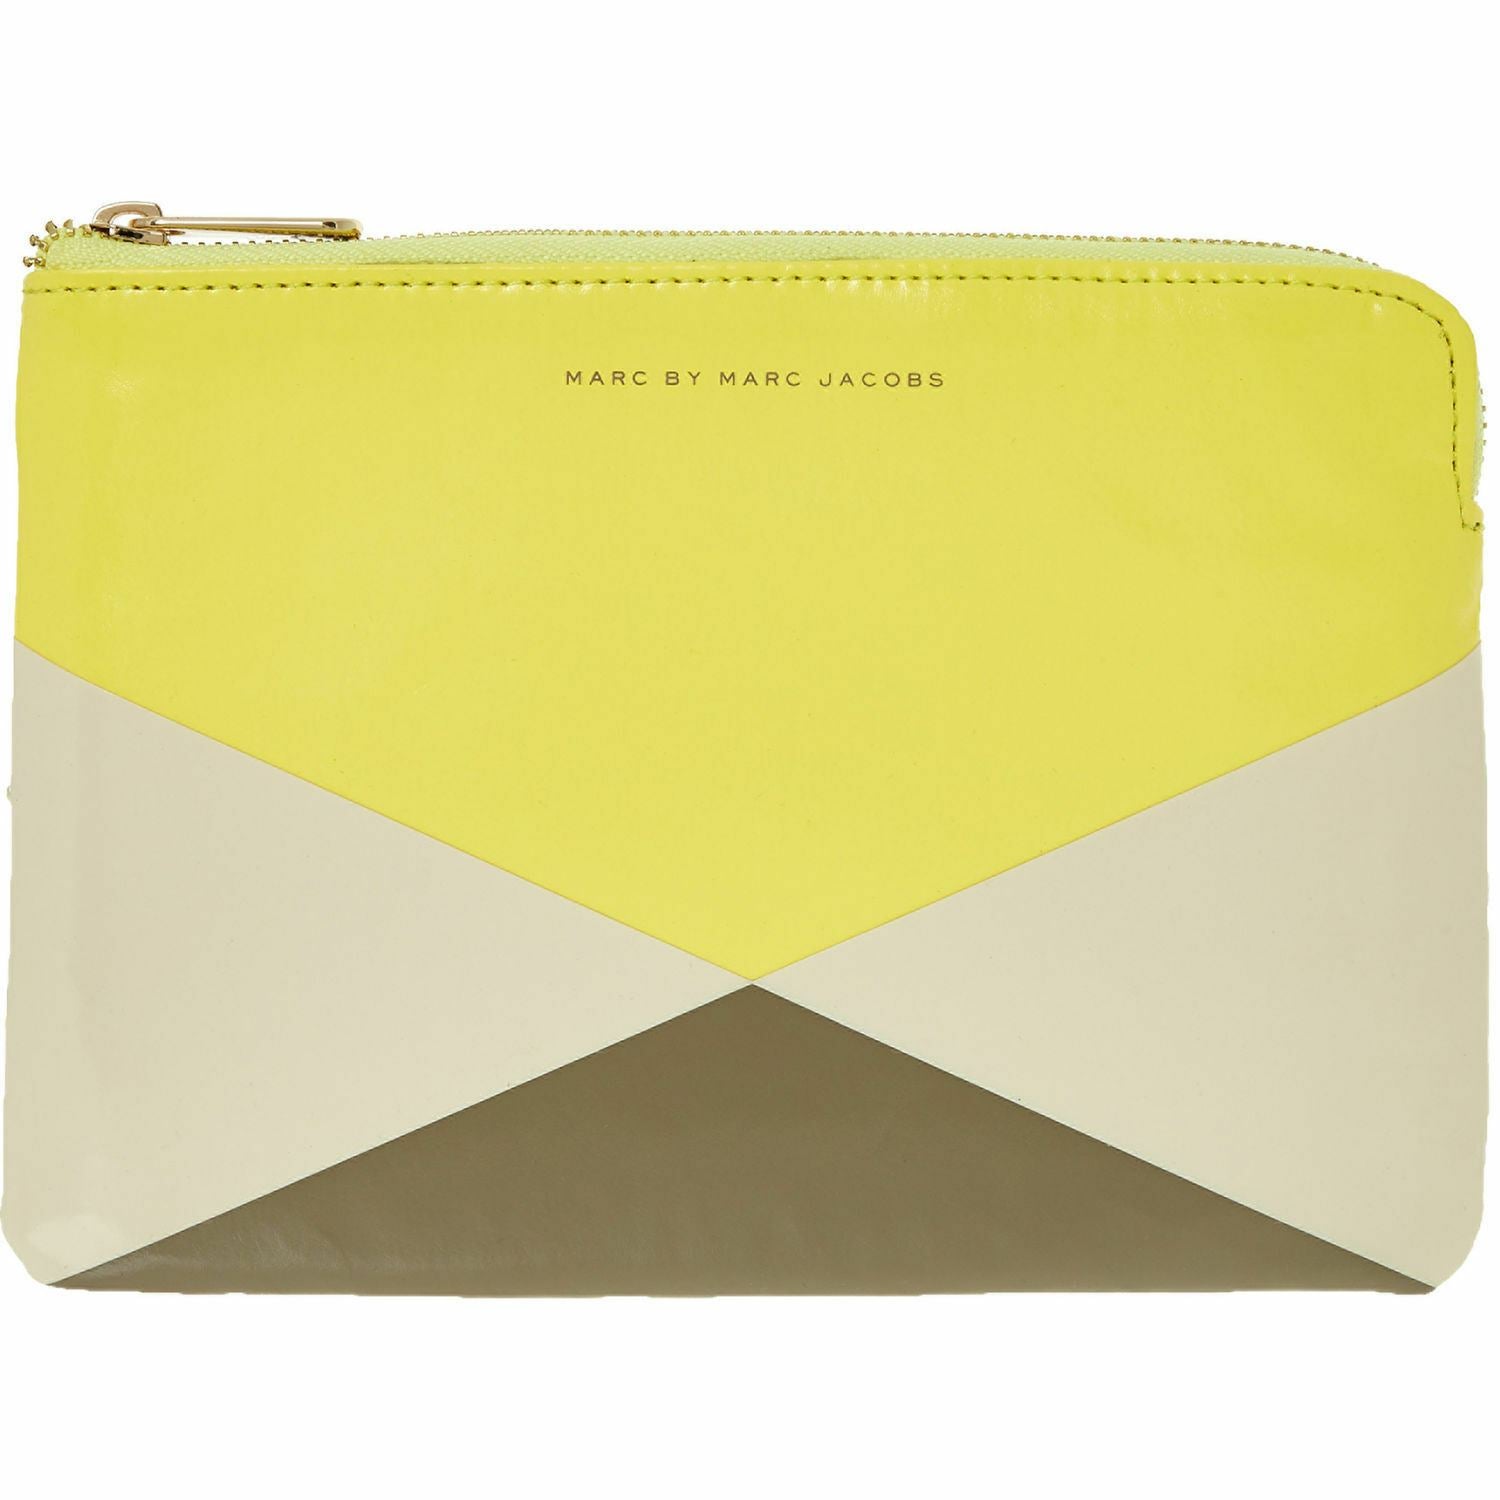 Authentic Marc By MARC JACOBS Banana Cream Geometric Tablet Case 9" rrp Â£44